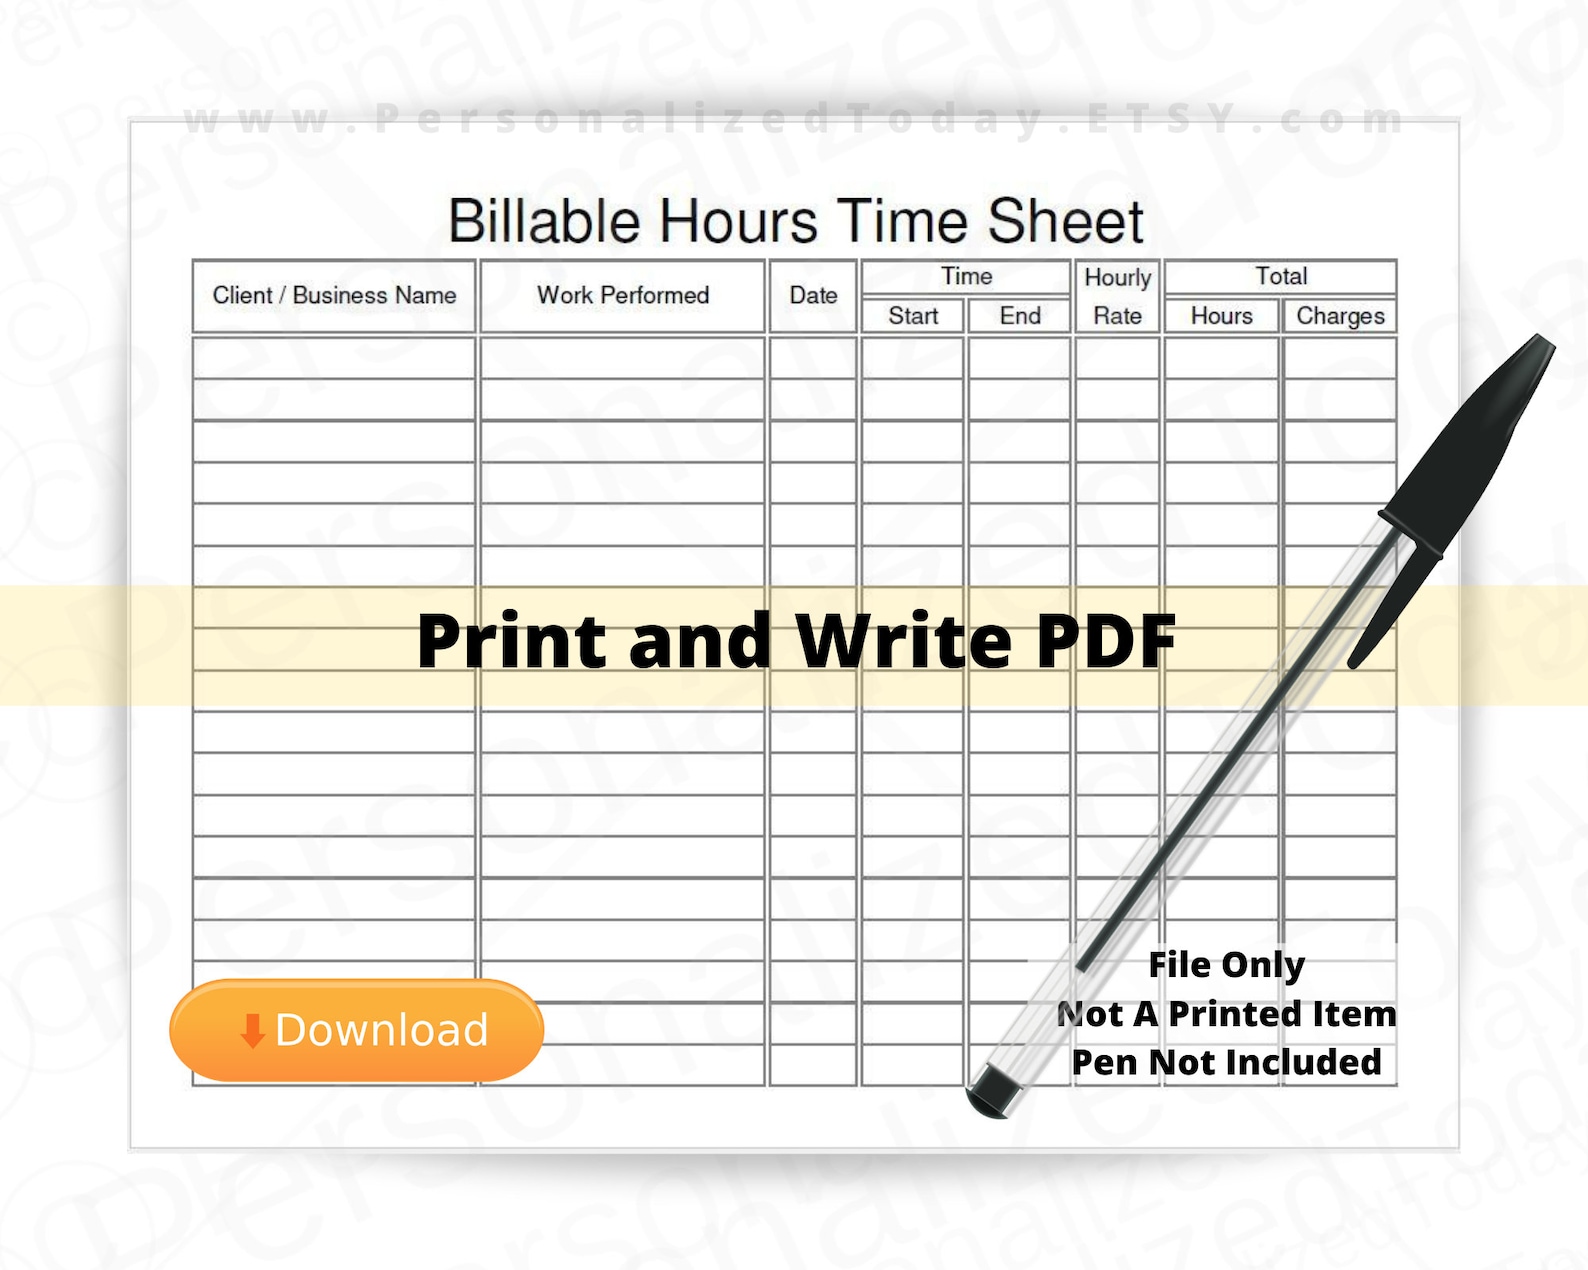 billable-hours-timesheet-fillable-and-printable-pdf-digital-etsy